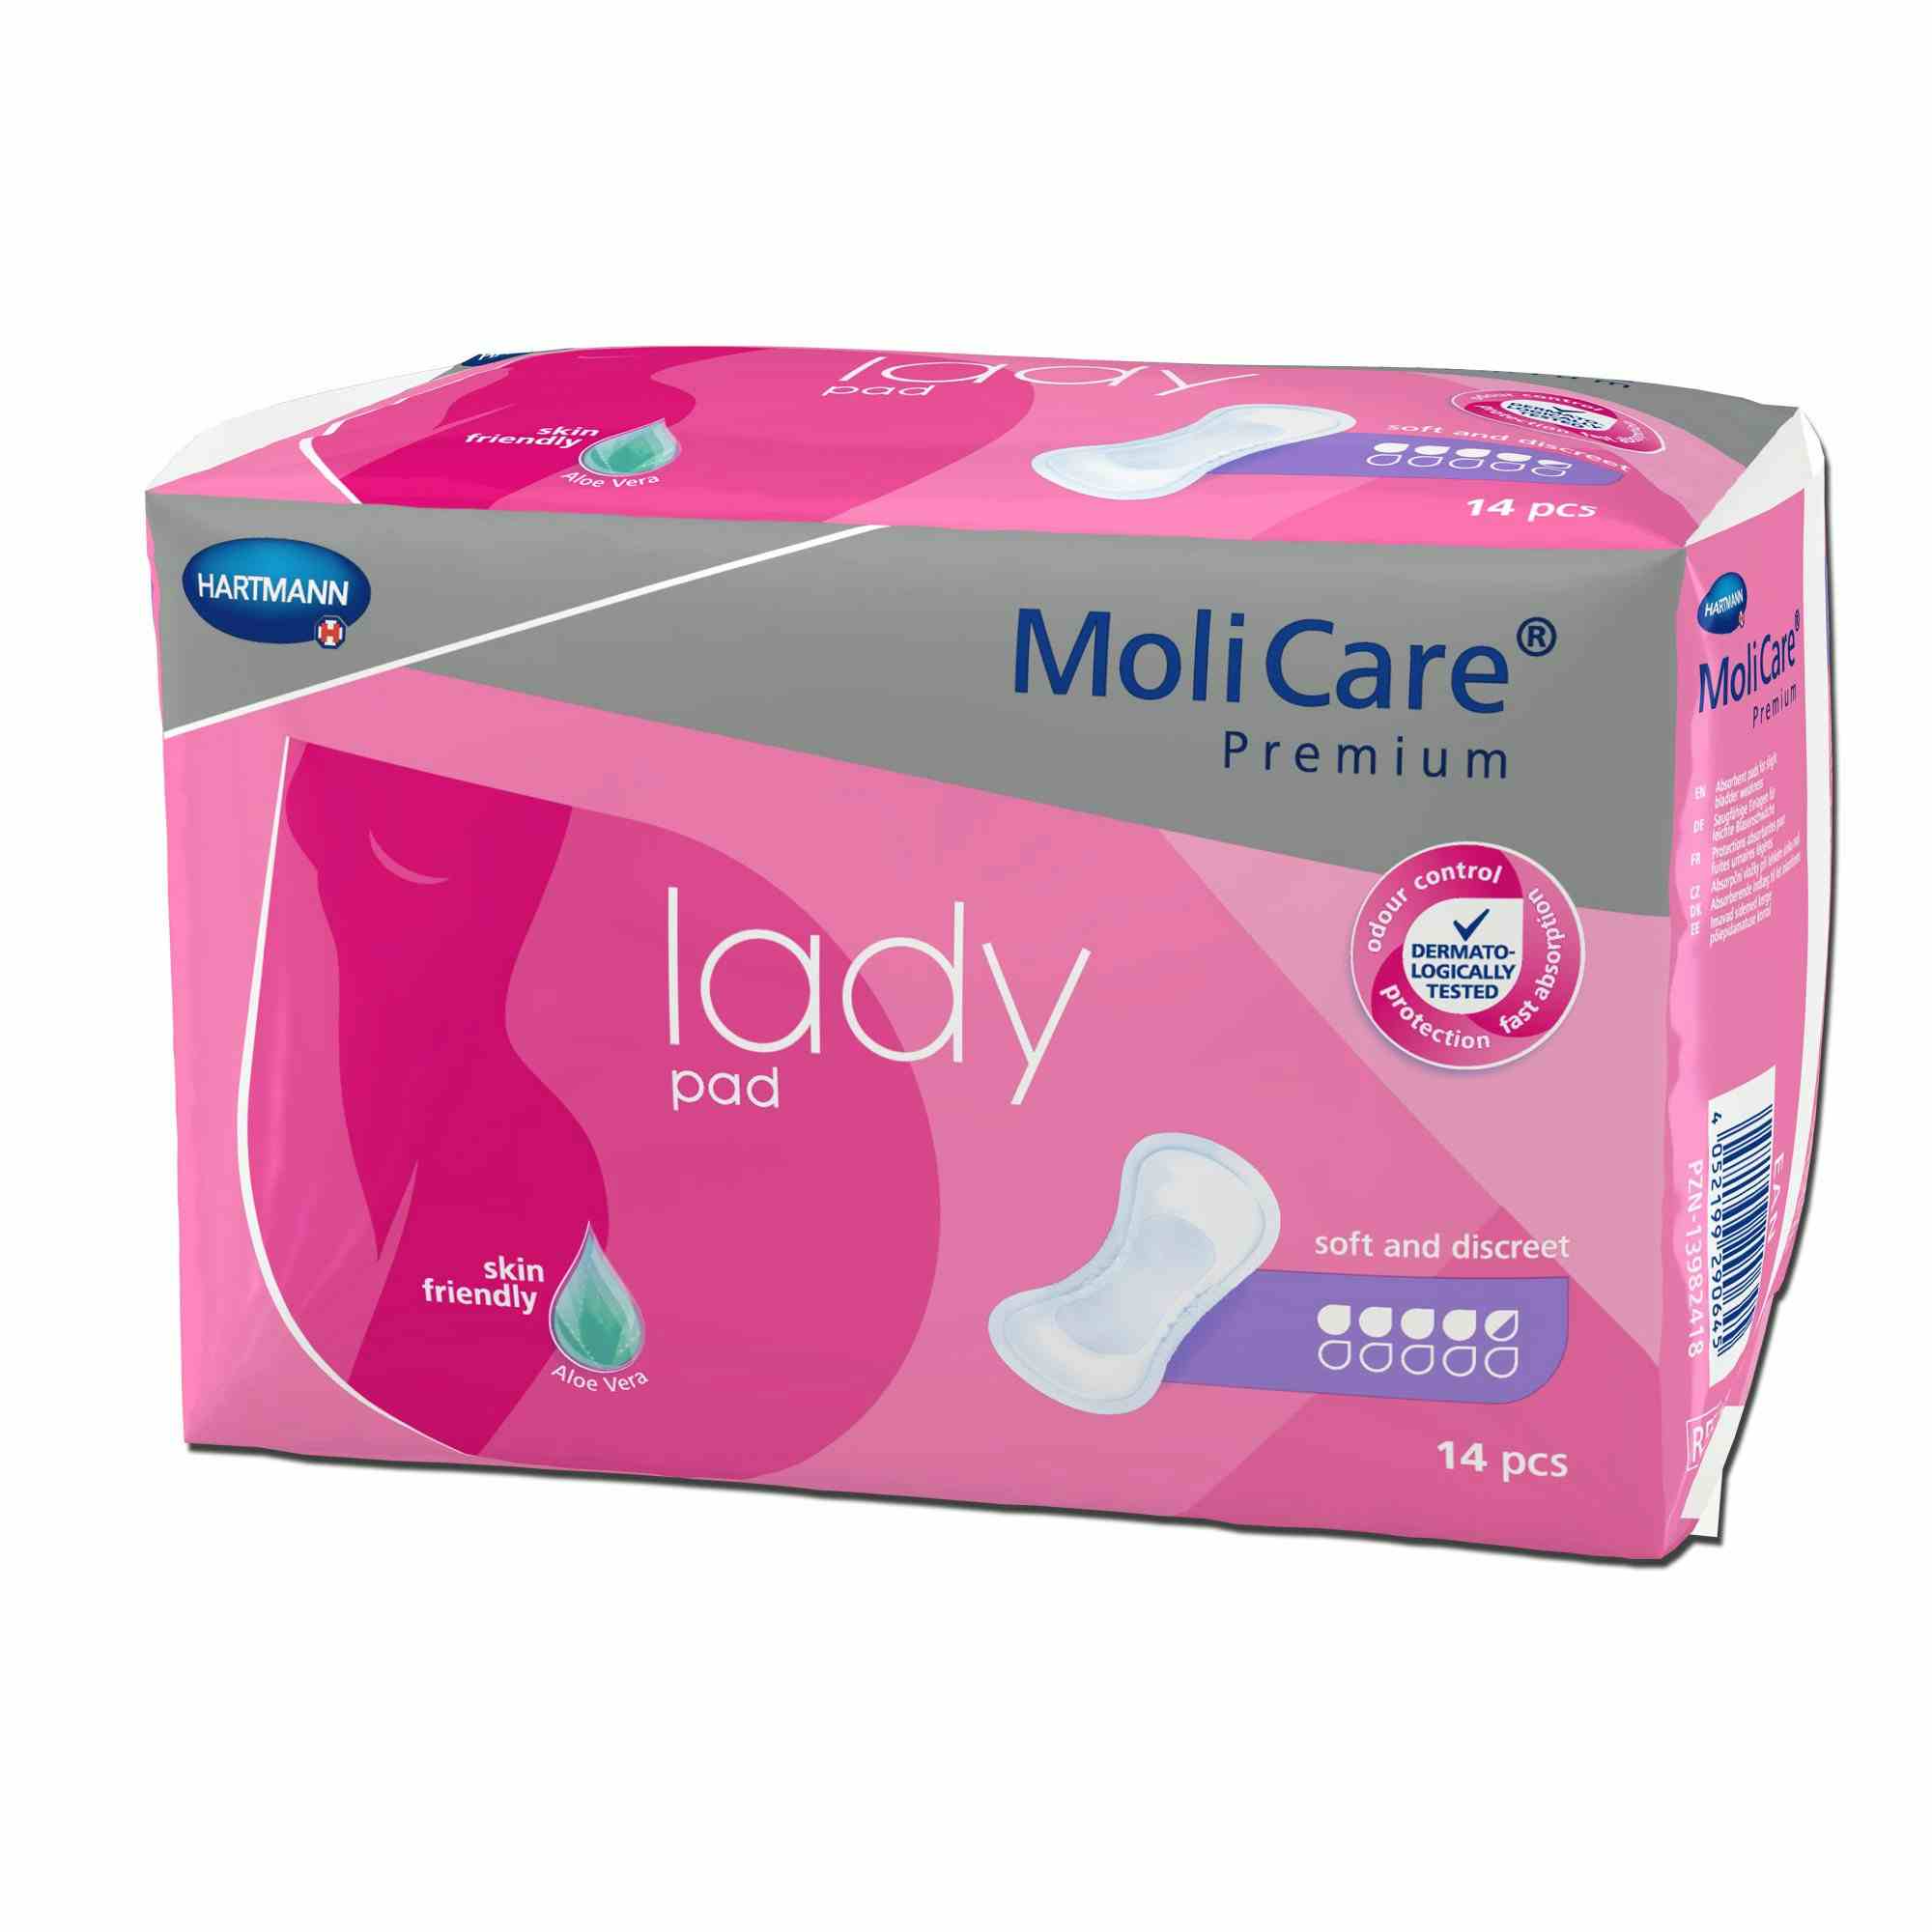 MoliCare Premium Adult Female Disposable Bladder Control Pad, Moderate, 168654, One Size Fits 4.5 Drops - Bag of 14